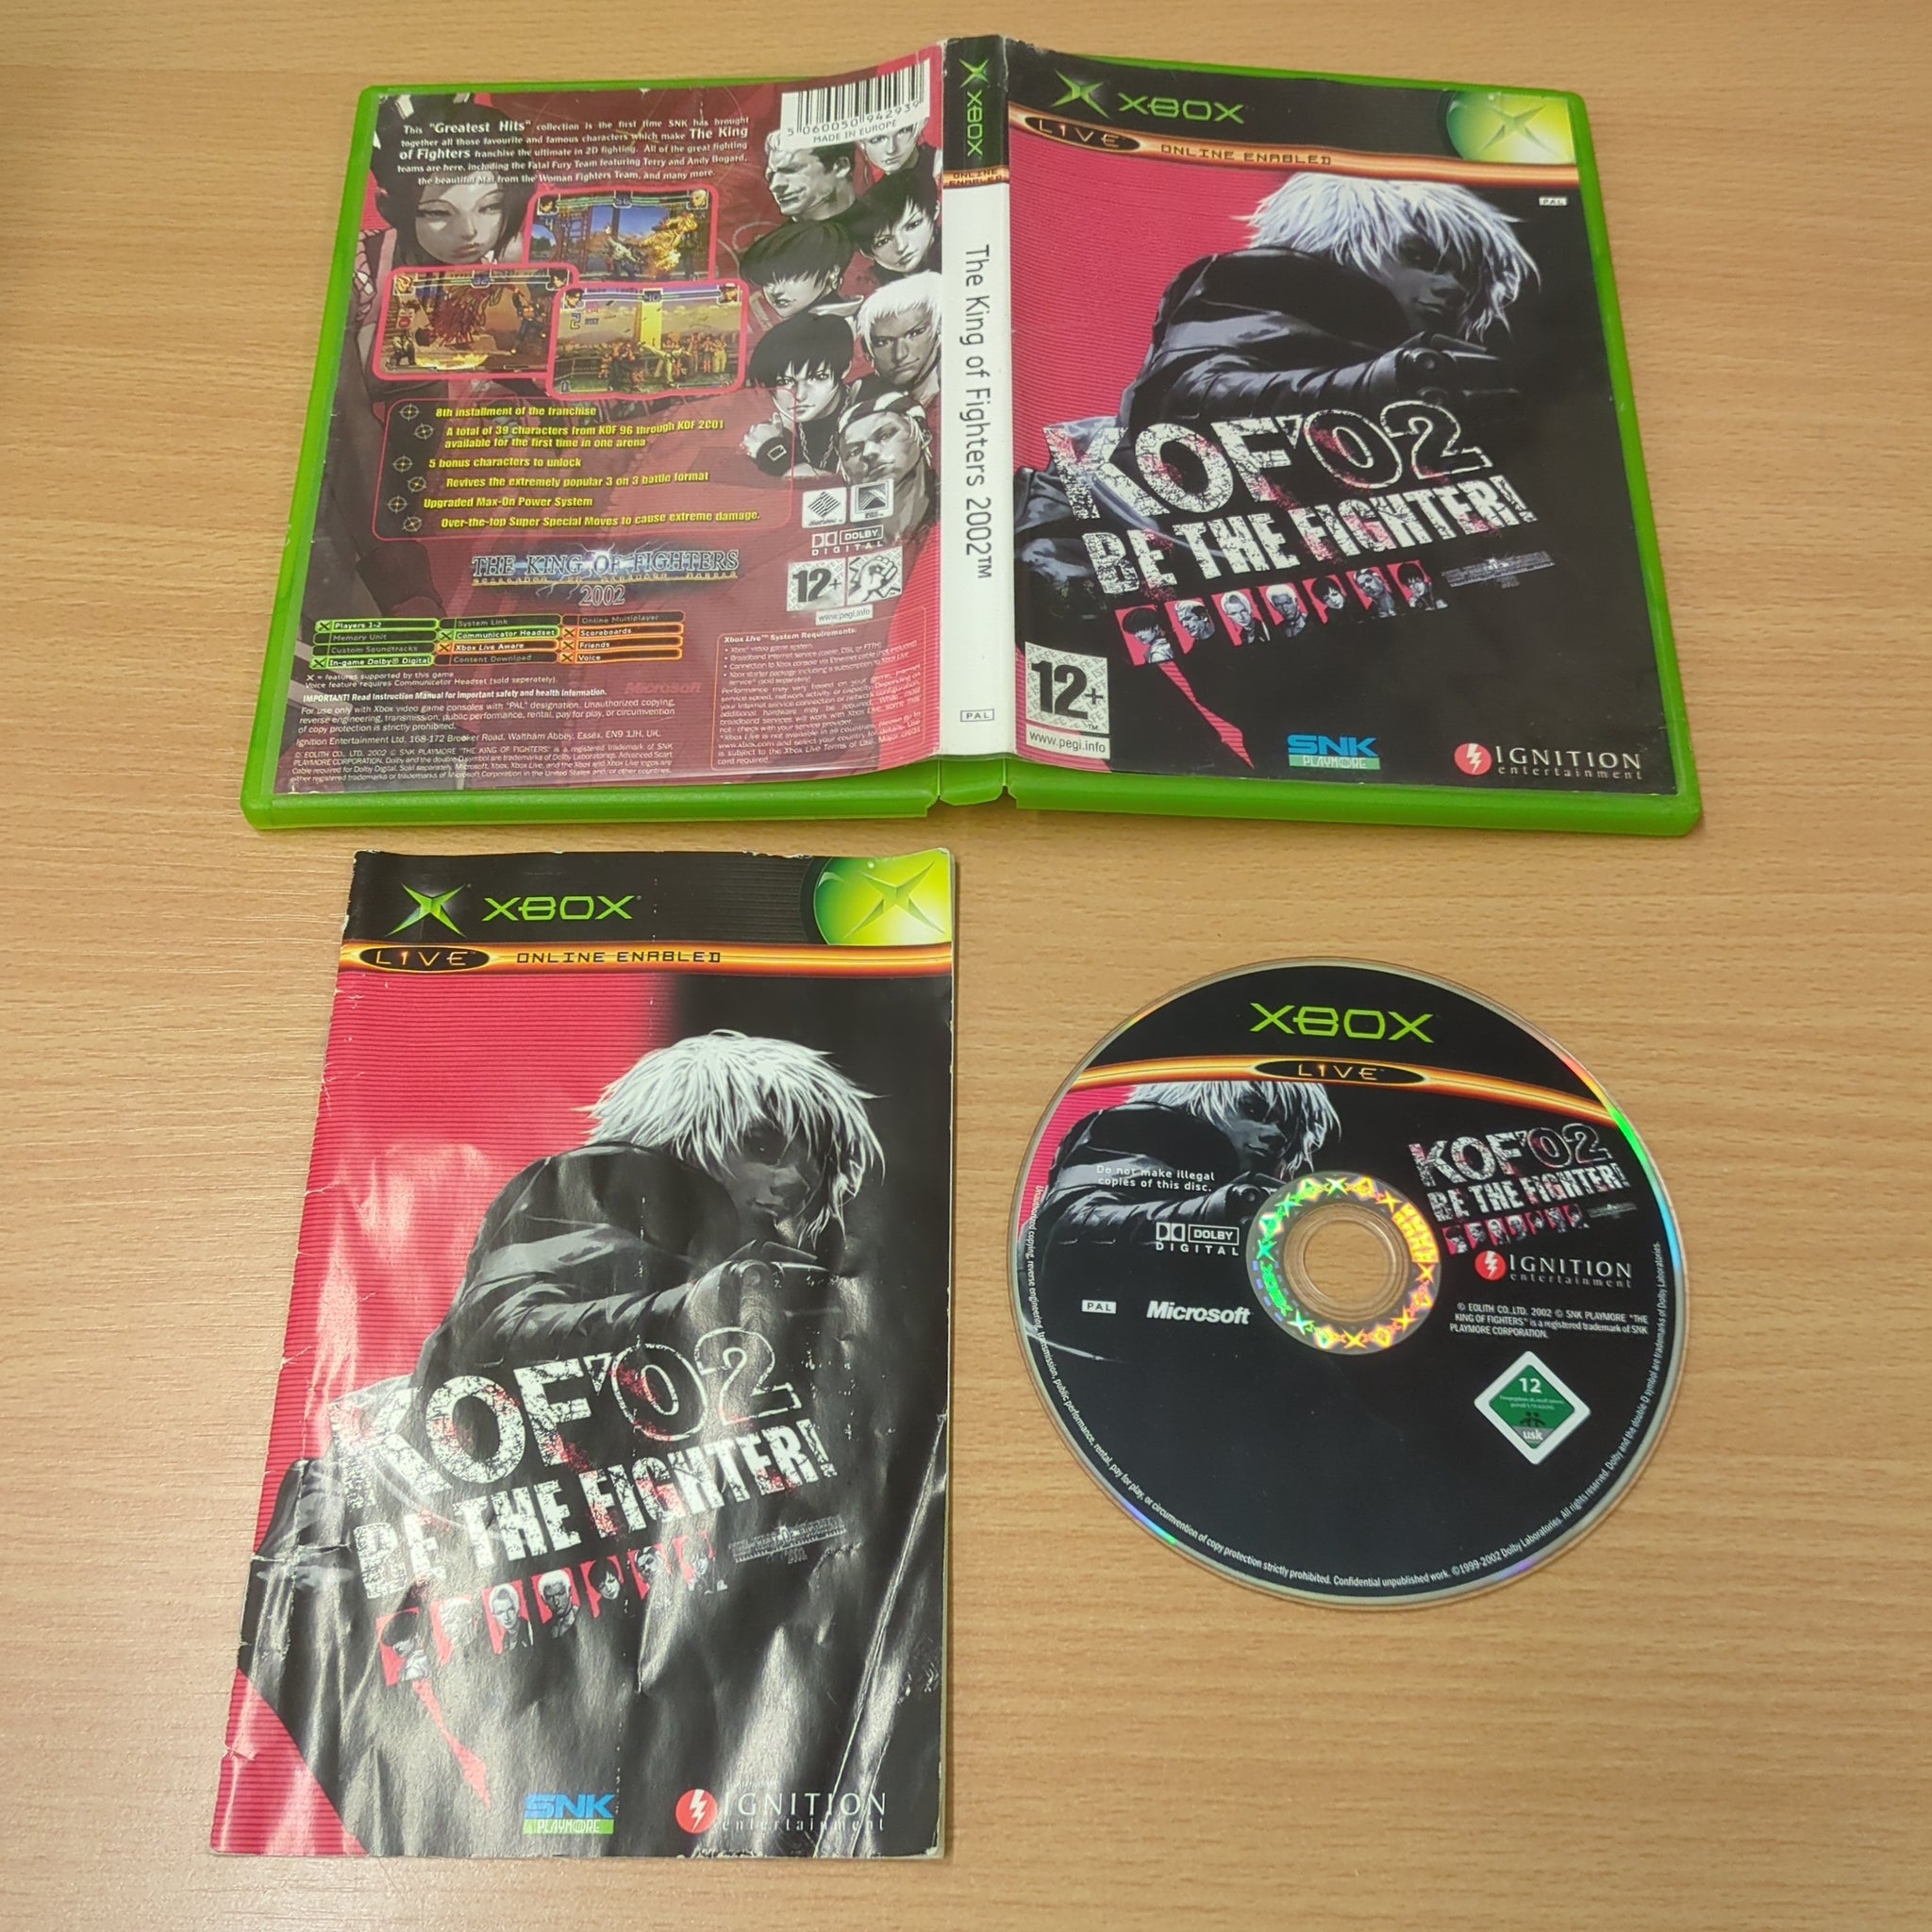 The King of Fighters 2002 original Xbox game